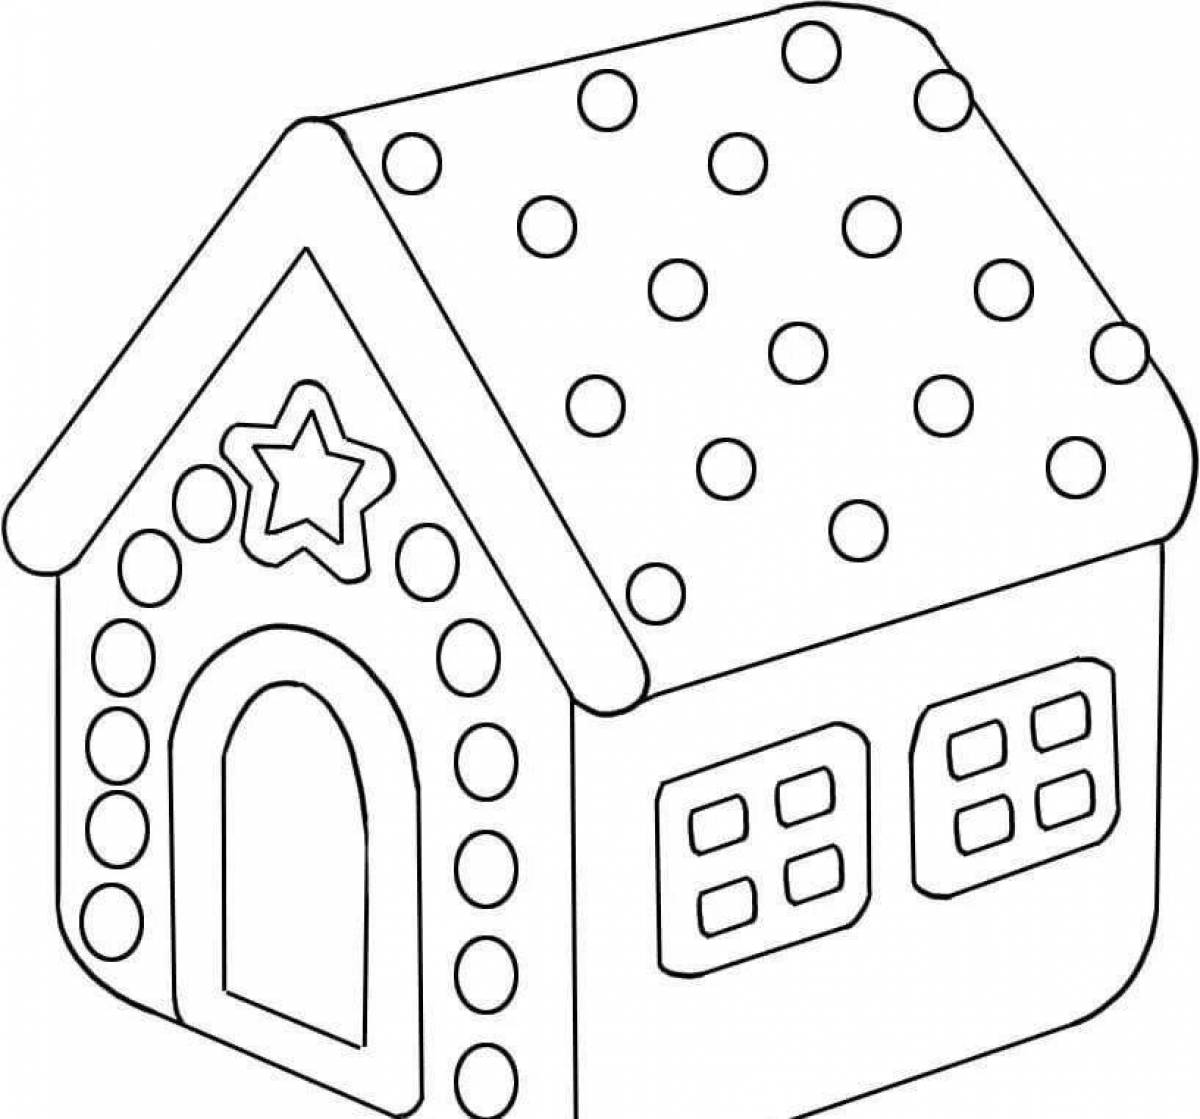 Glittering house coloring book for kids